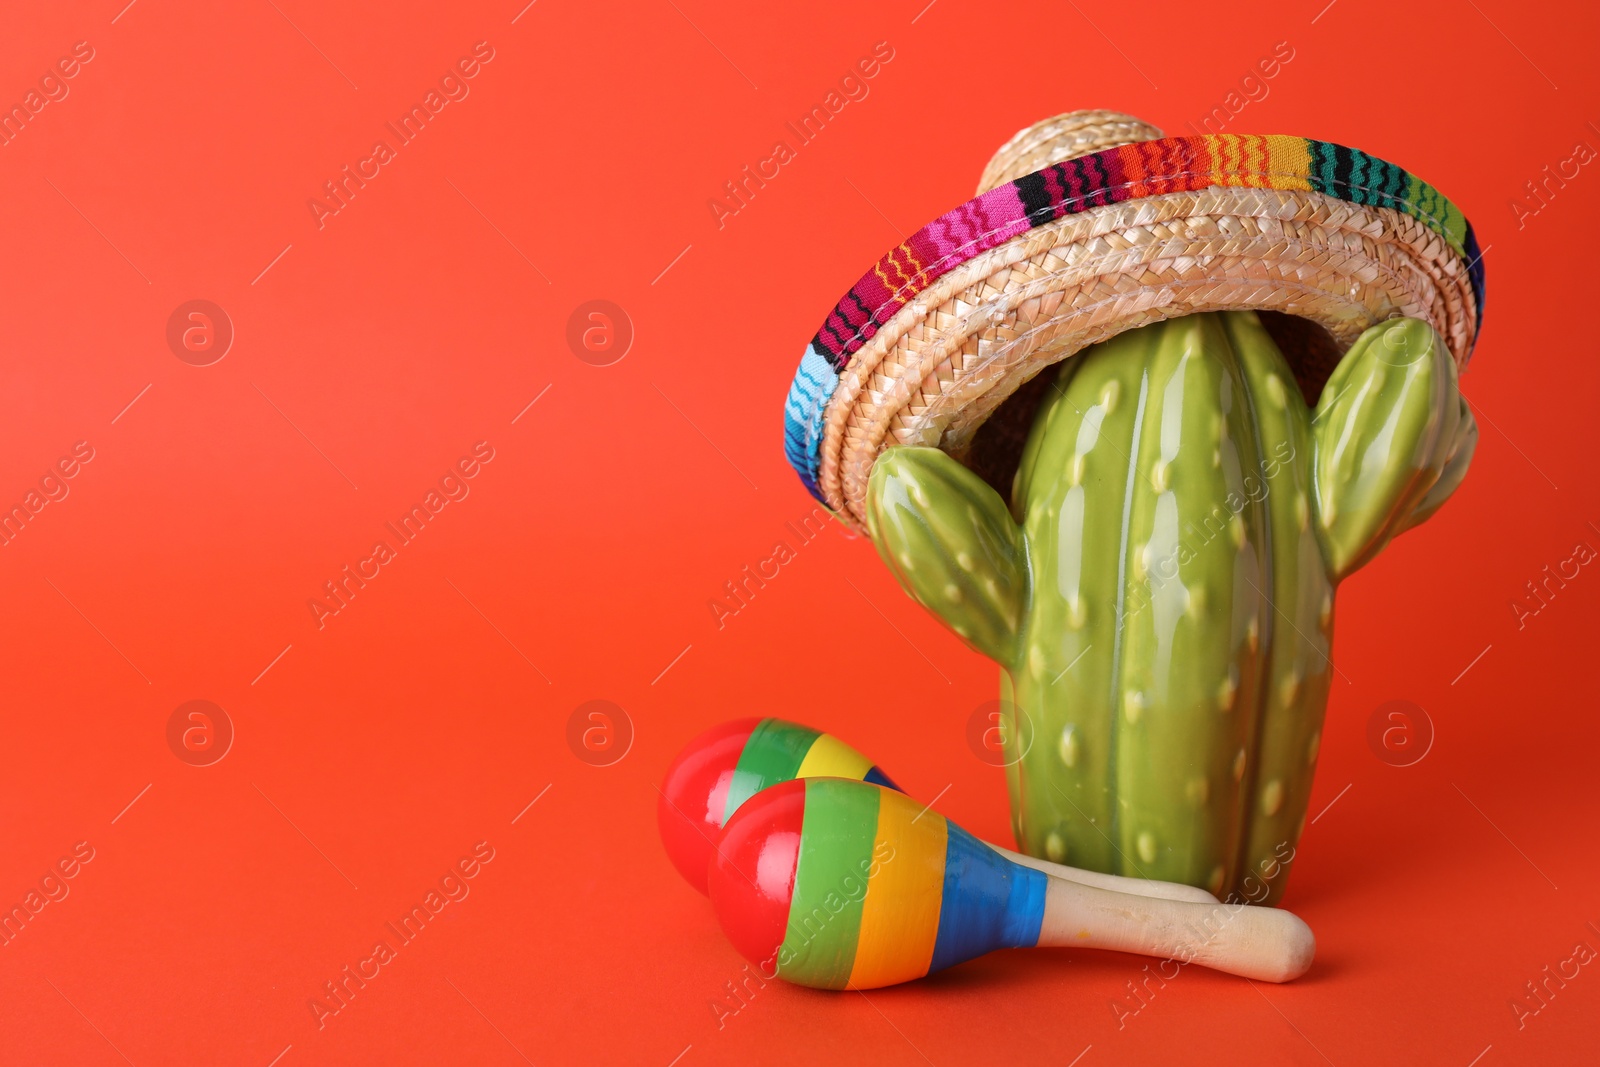 Photo of Colorful maracas and toy cactus with sombrero hat on red background, space for text. Musical instrument